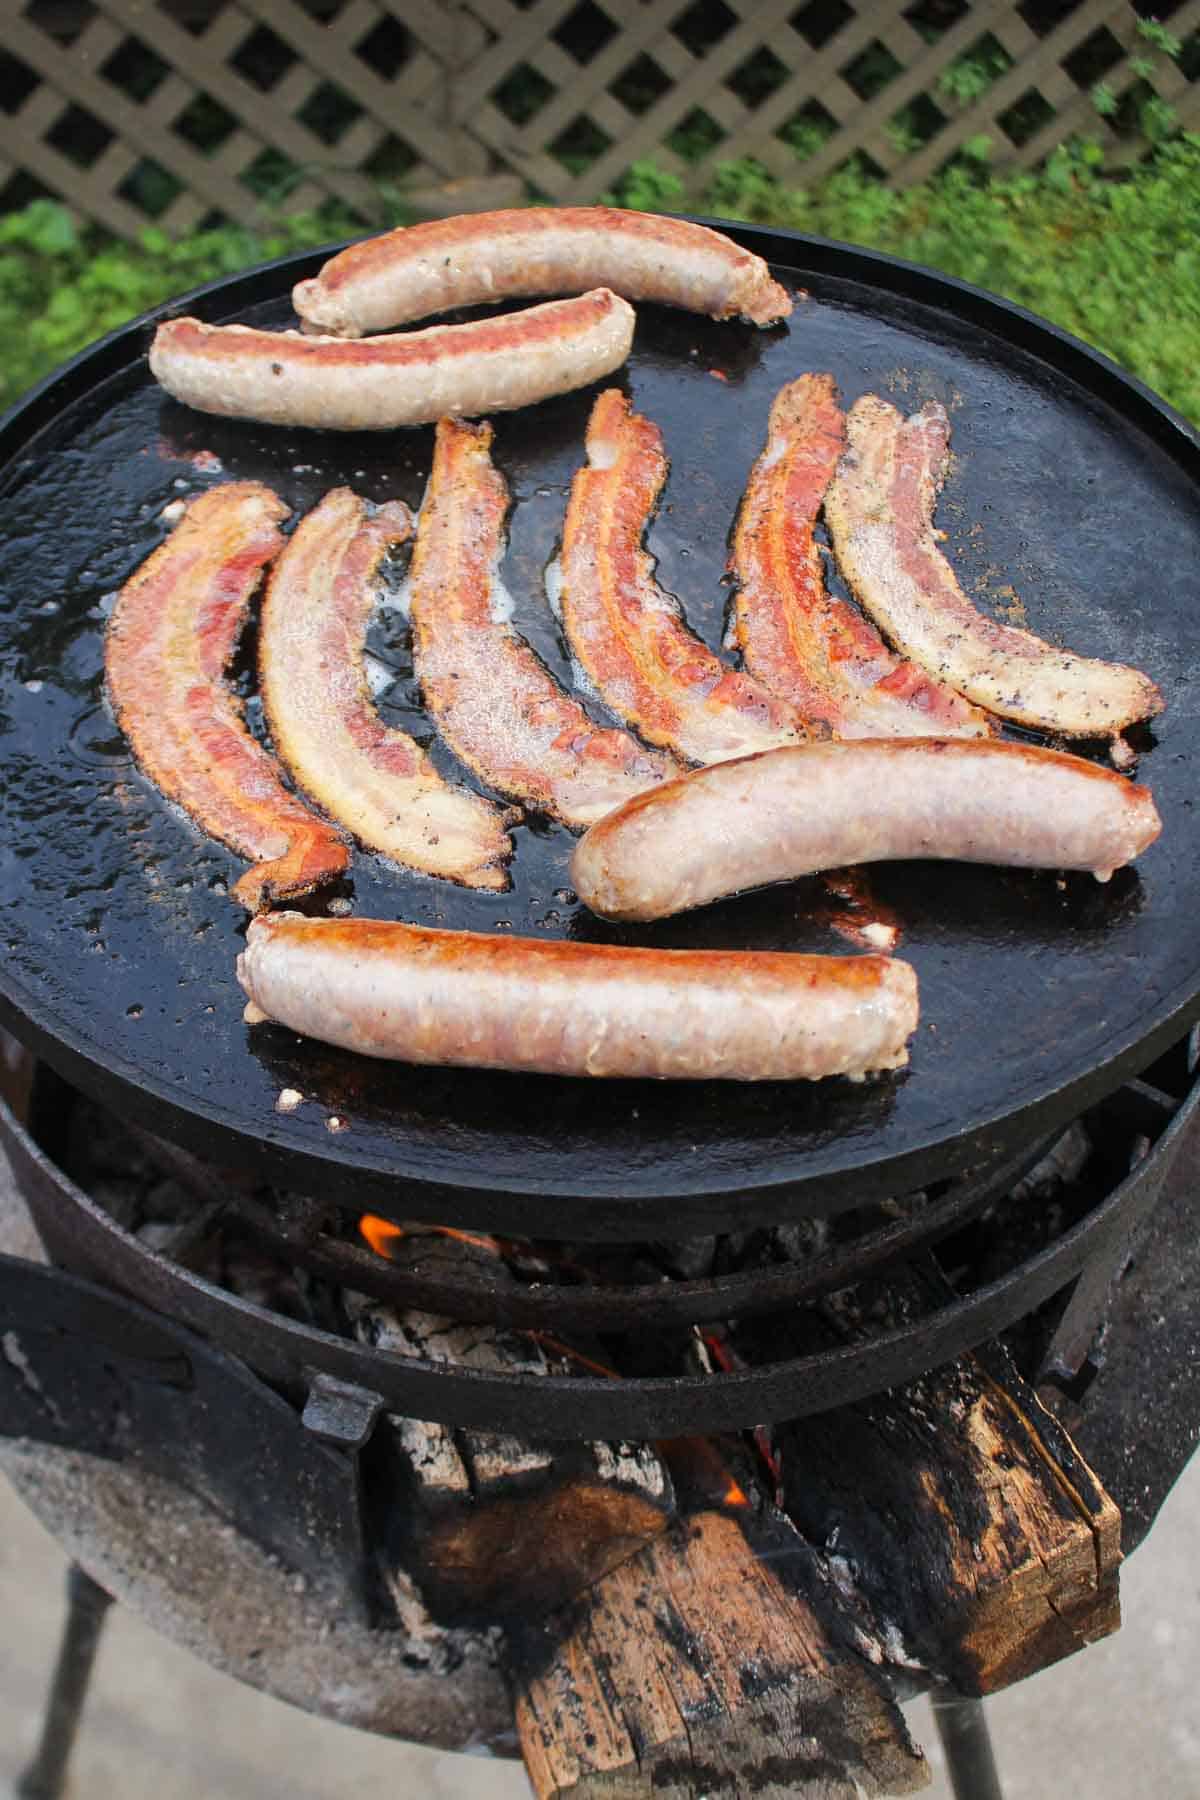 The bacon and sausage for the Ron Swanson Breakfast Skillet on the grill. 